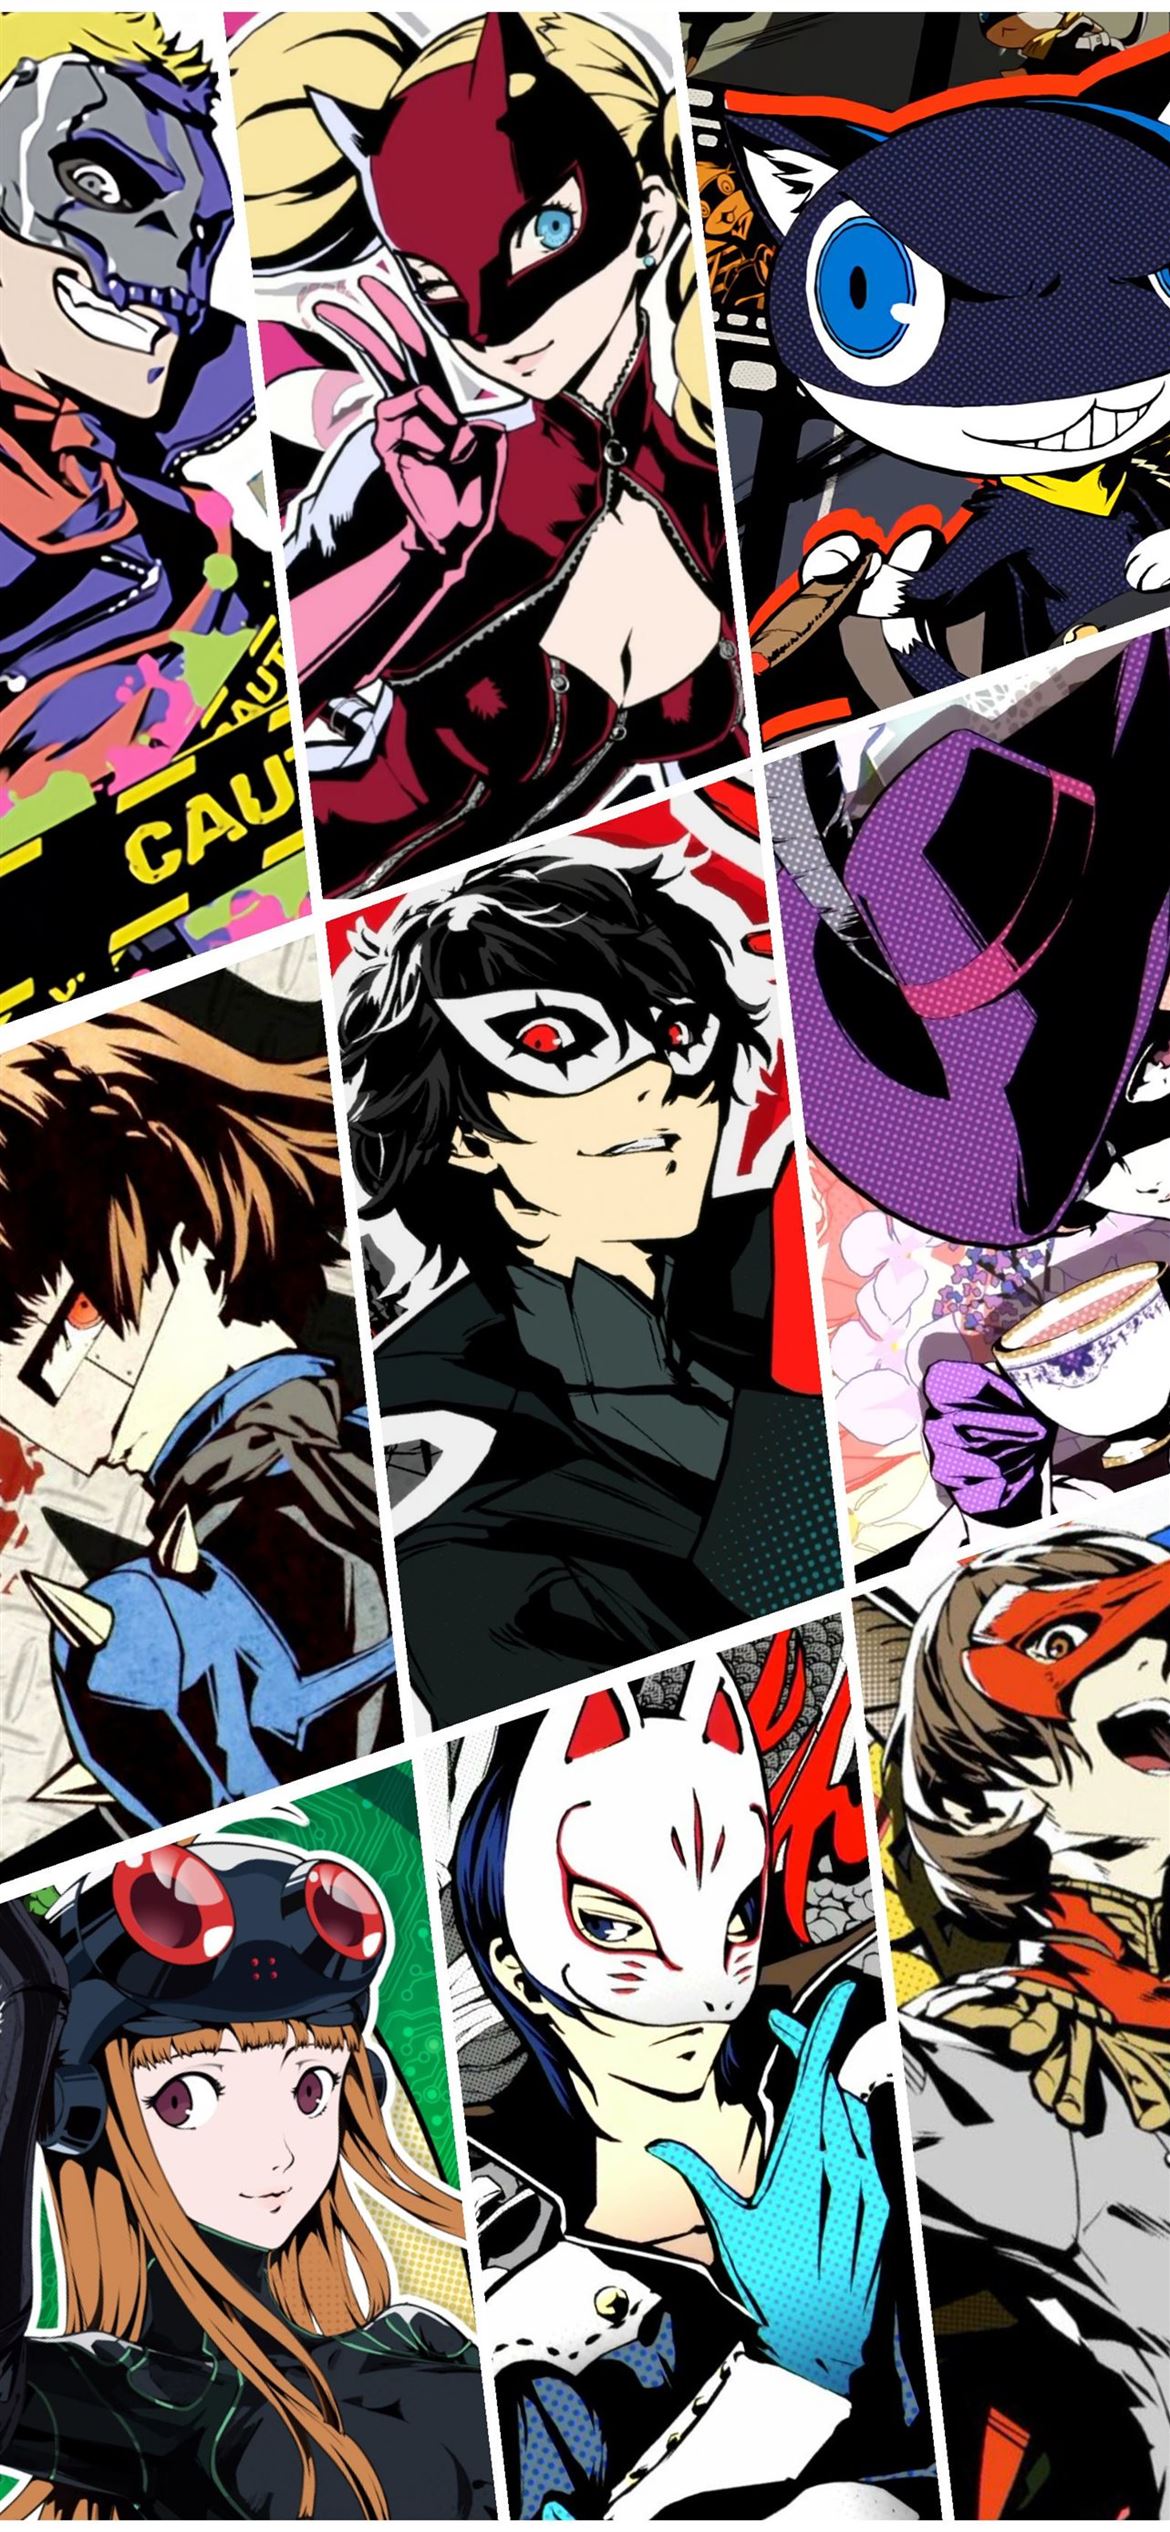 Persona 5 Strikers Digital Wallpaper Collection  Atlus West